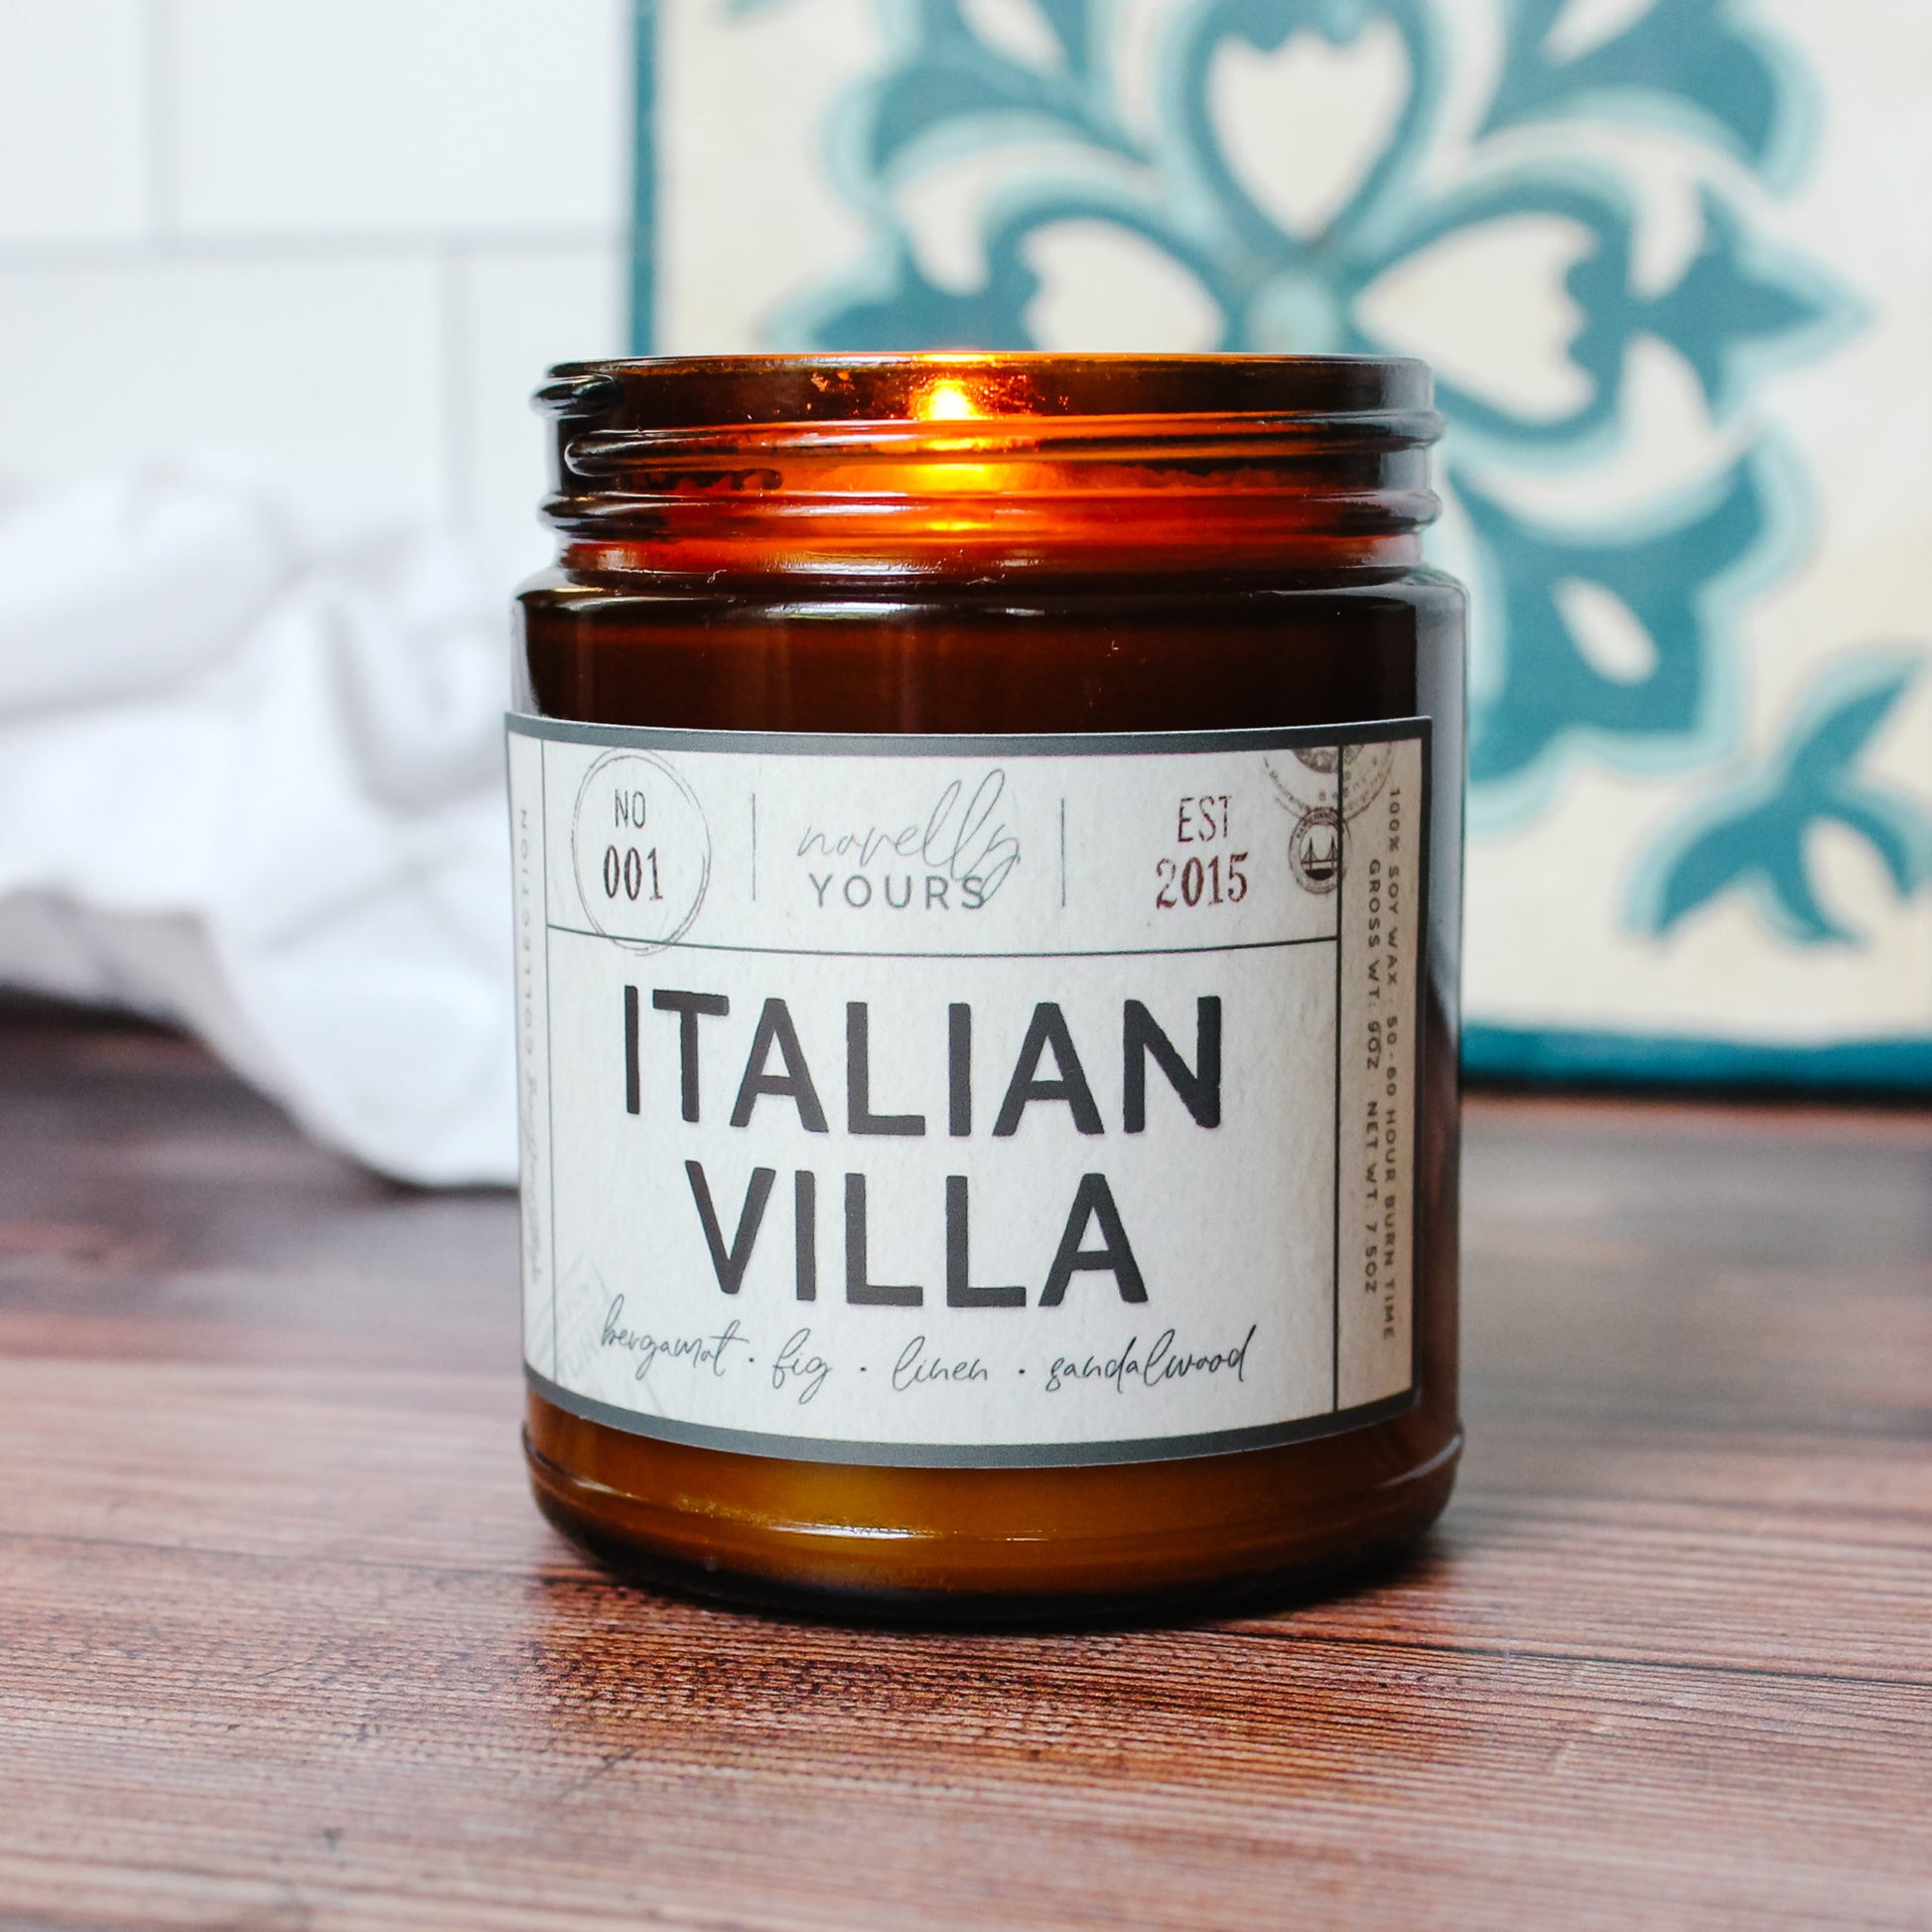 Italian villa scented soy wax candle in glass amber jar with black lid by novelly yours